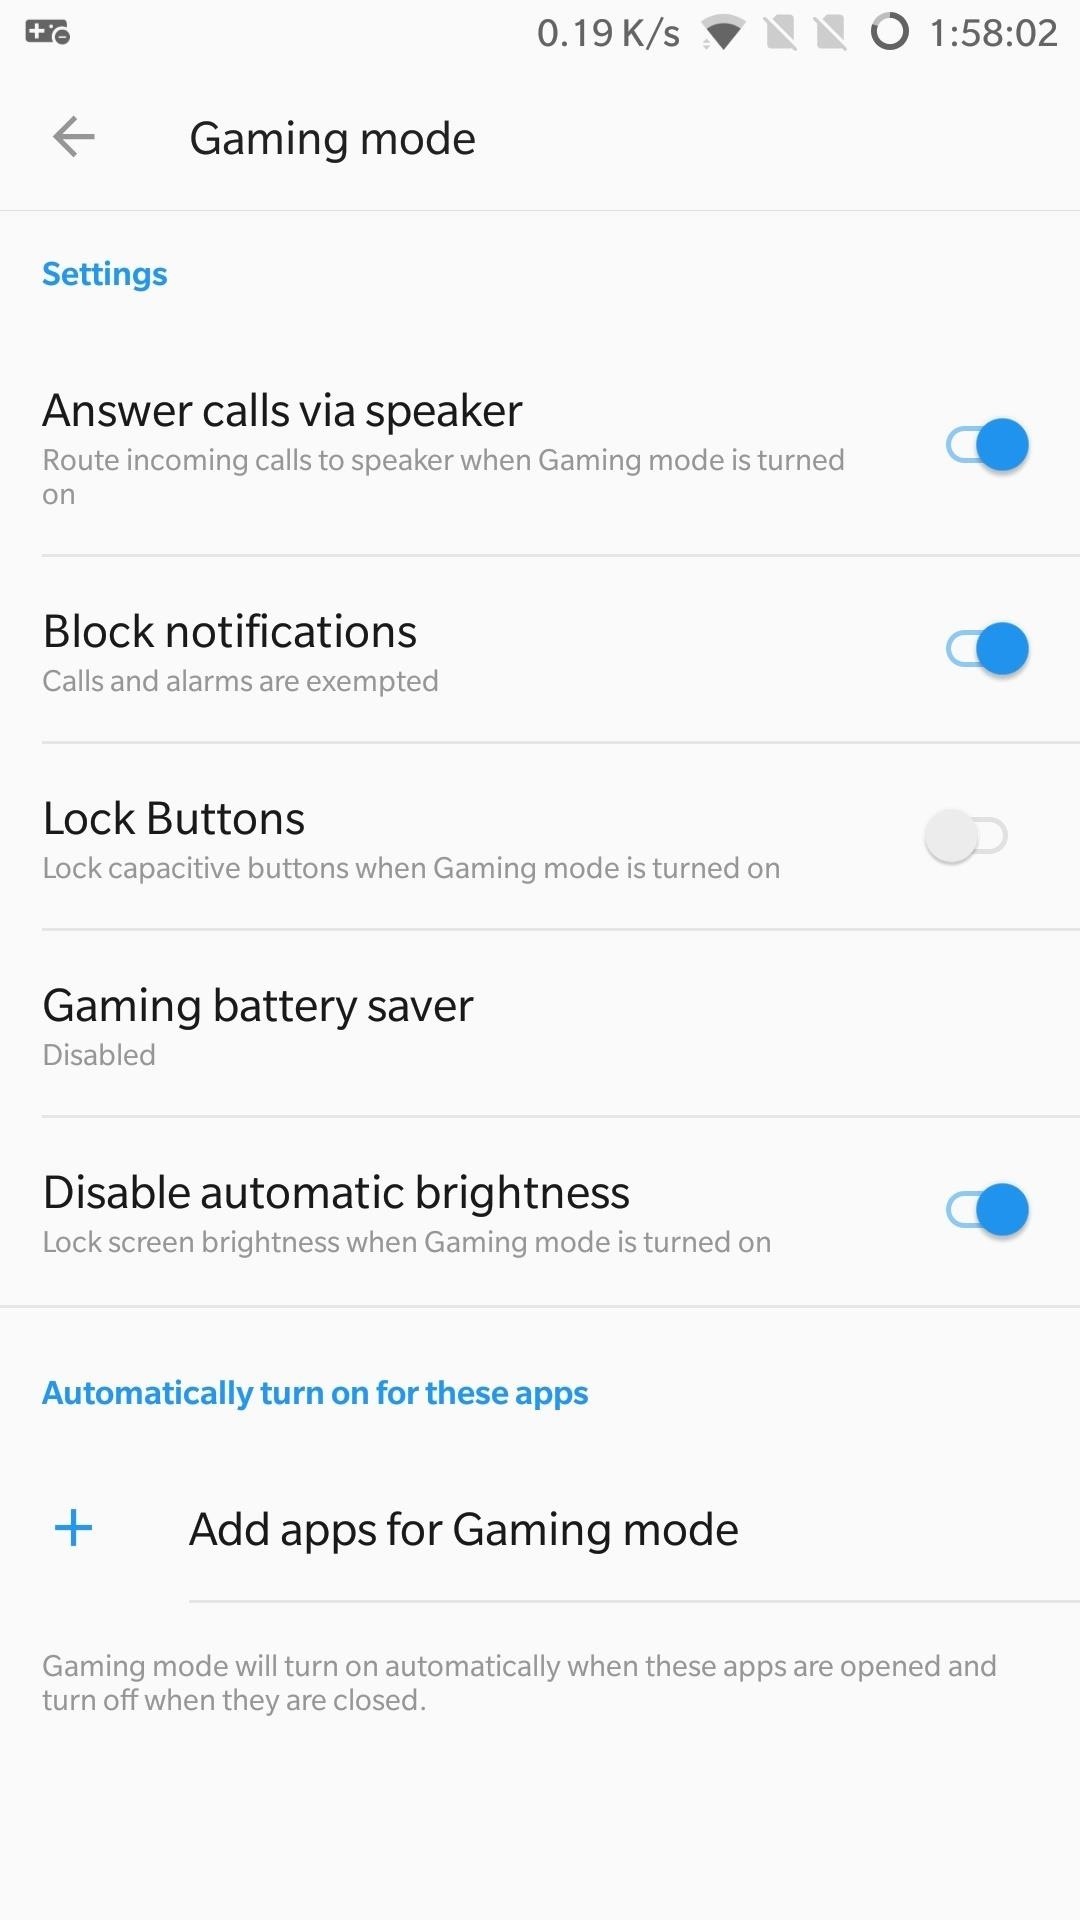 Boost Fortnite Performance on Android by Changing These Settings